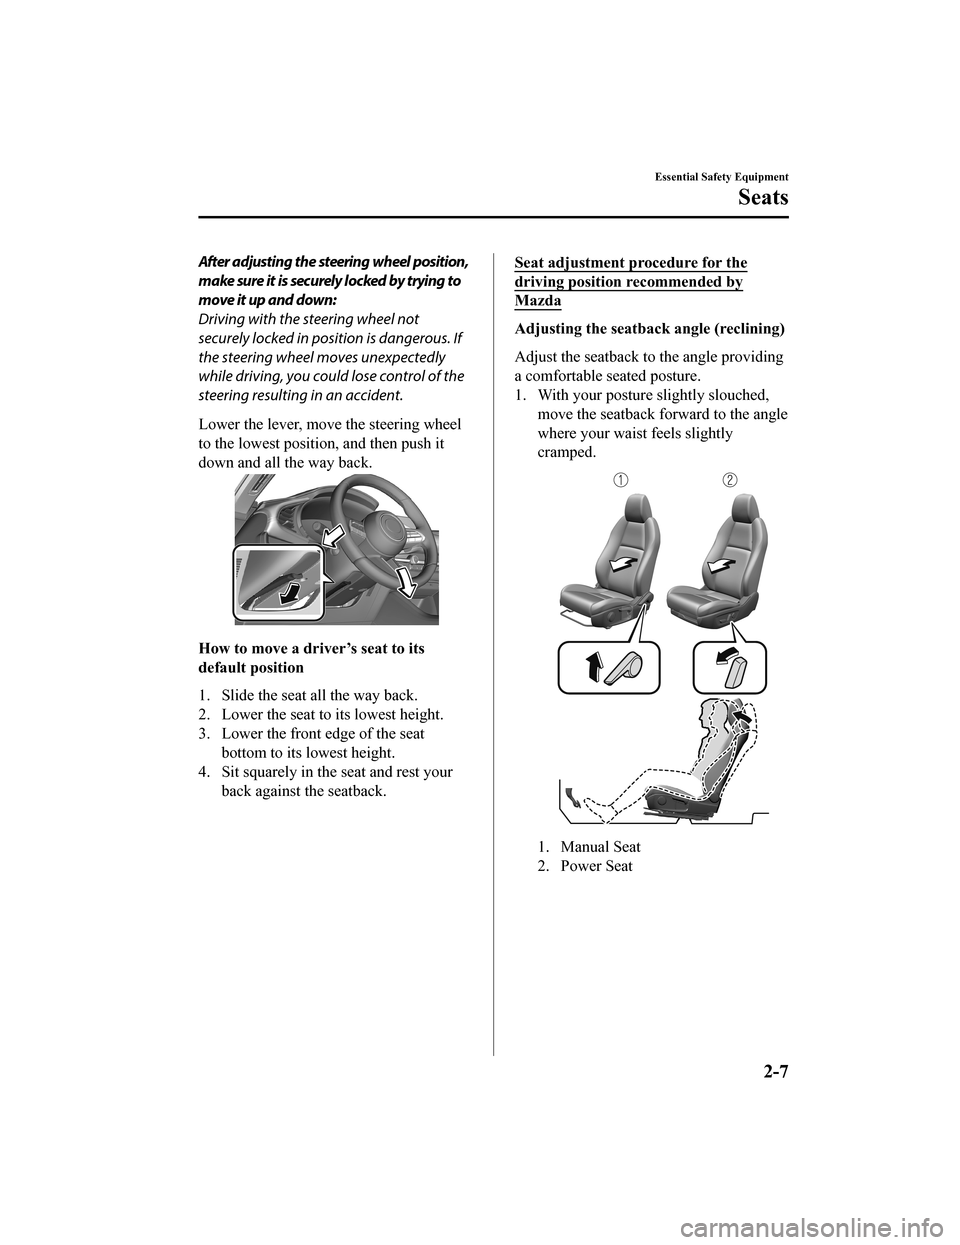 MAZDA MODEL 3 HATCHBACK 2020  Owners Manual (in English) After adjusting the steering wheel position,
make sure it is securely locked by trying to
move it up and down:
Driving with the steering wheel not
securely locked in position is dangerous. If
the stee